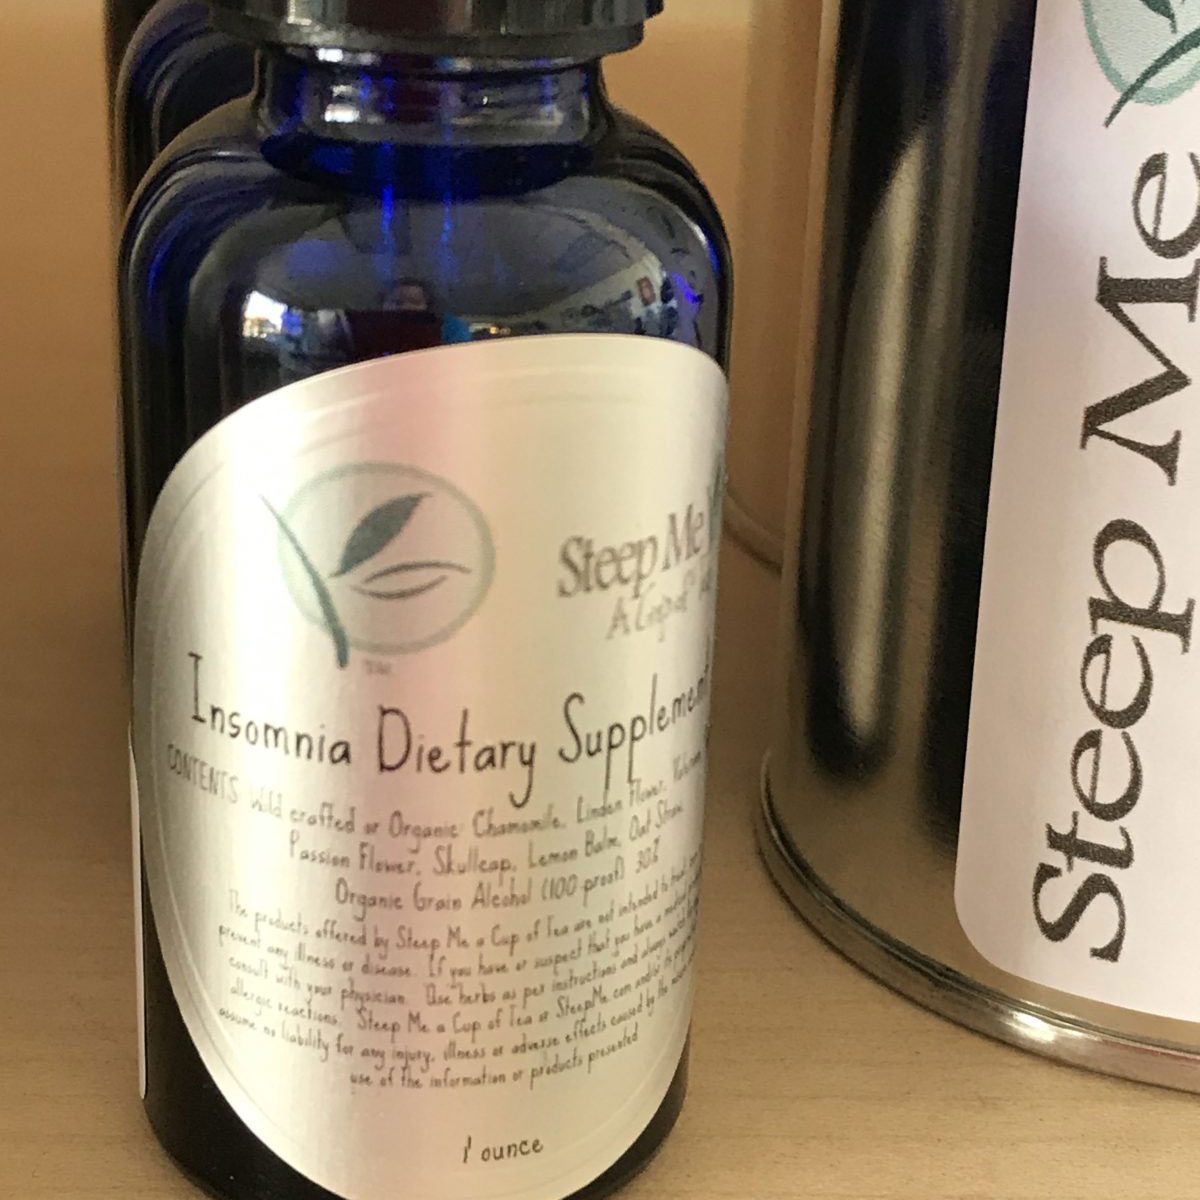 Insomnia Tincture he Steep Me Insomnia Helper is a very strong all natural sleep aid.  This tincture should be taken about 1/2 hour before bedtime.